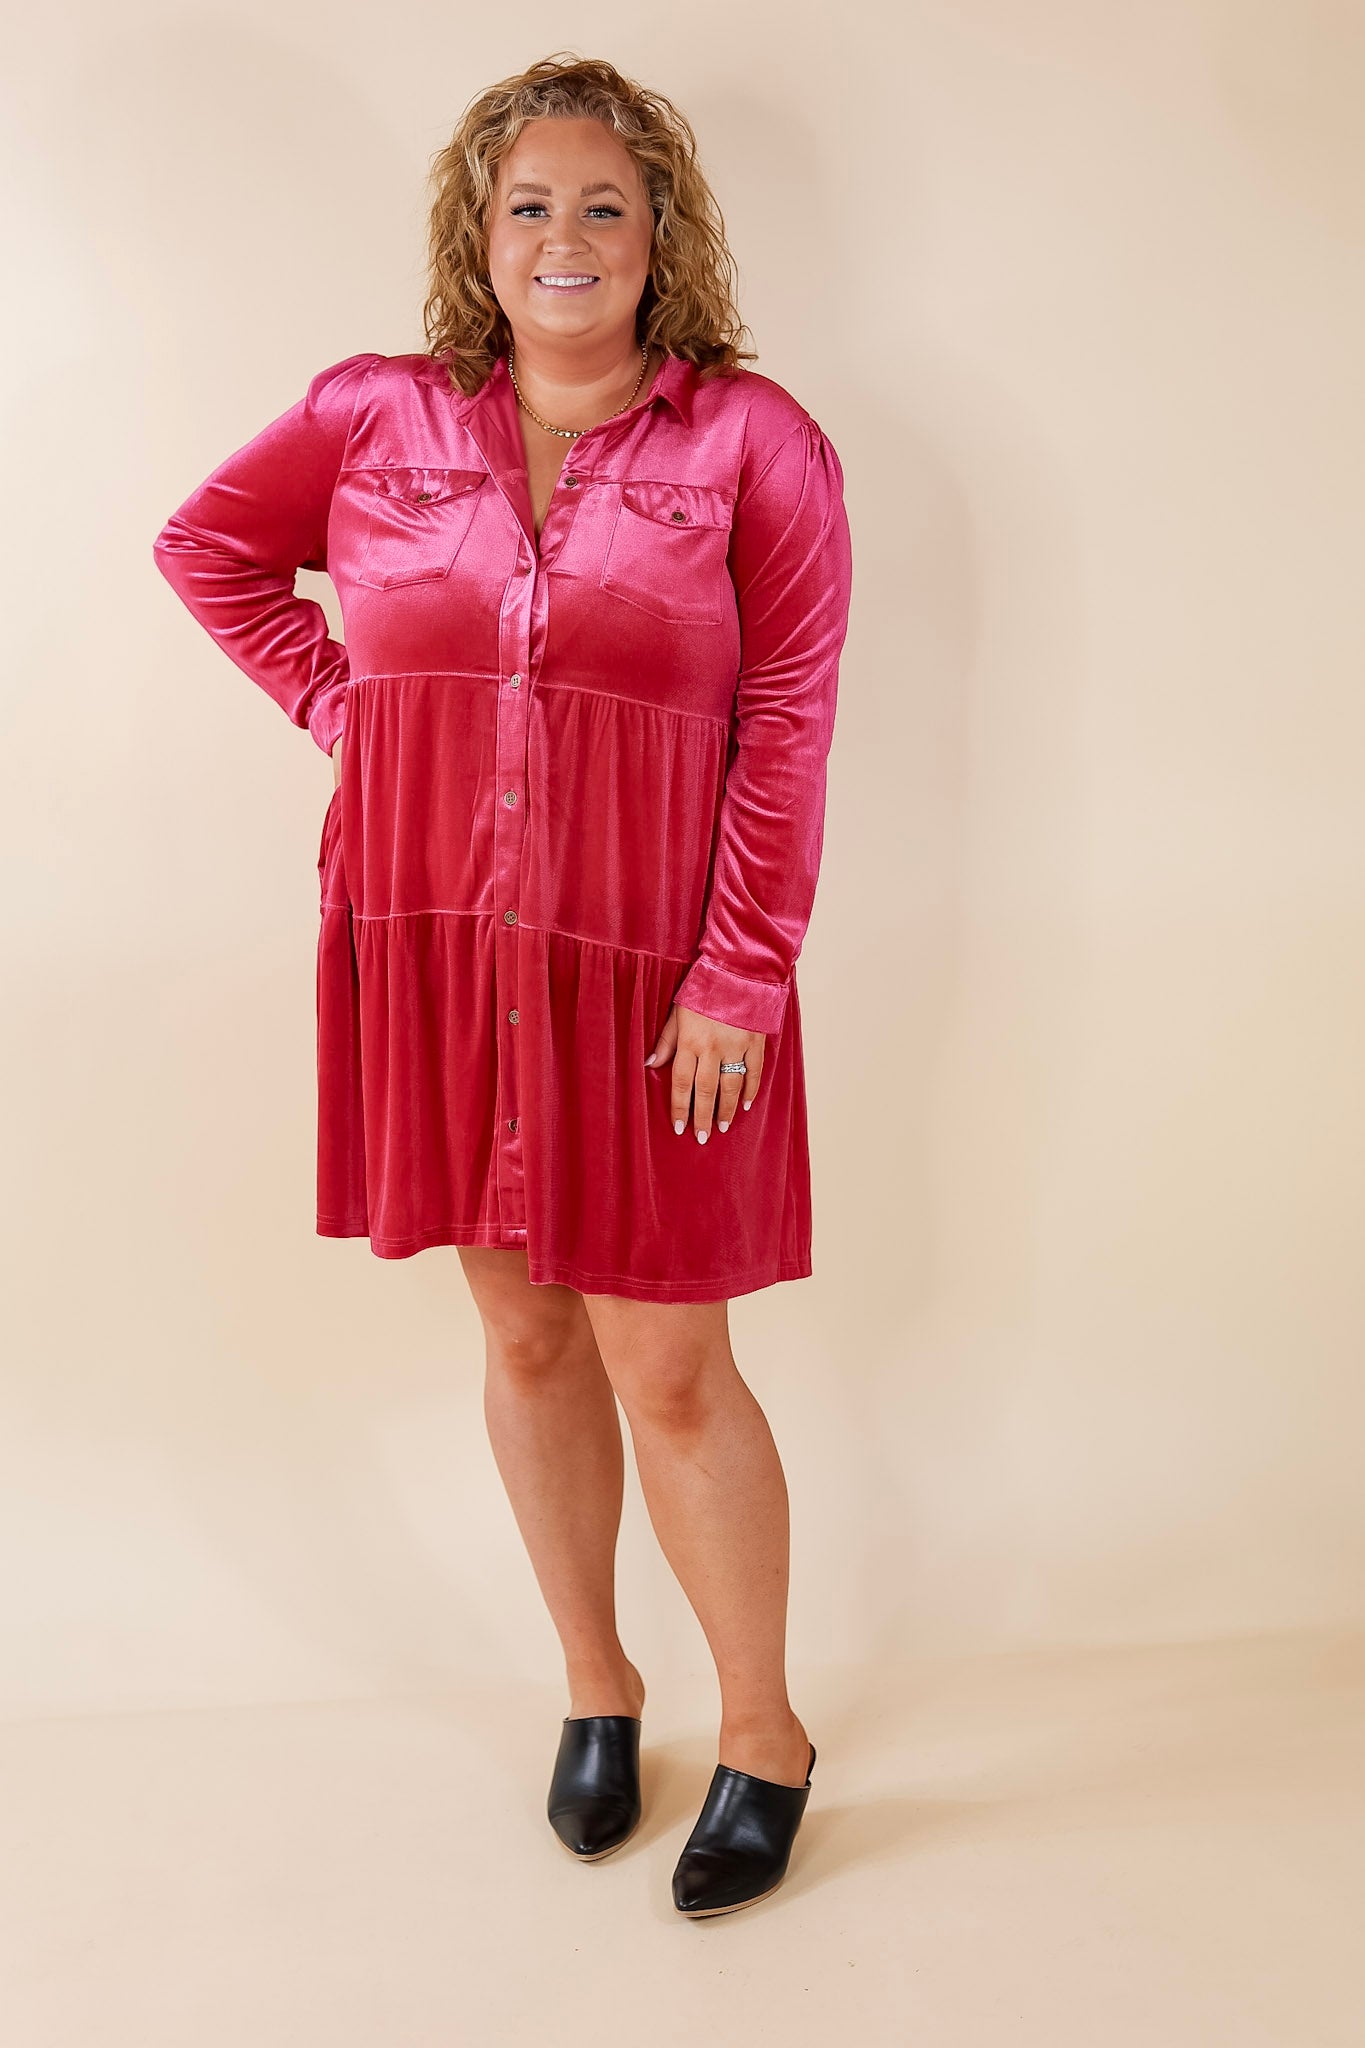 Grateful Gathering Velvet Button Up Dress with Long Sleeves in Raspberry Pink - Giddy Up Glamour Boutique